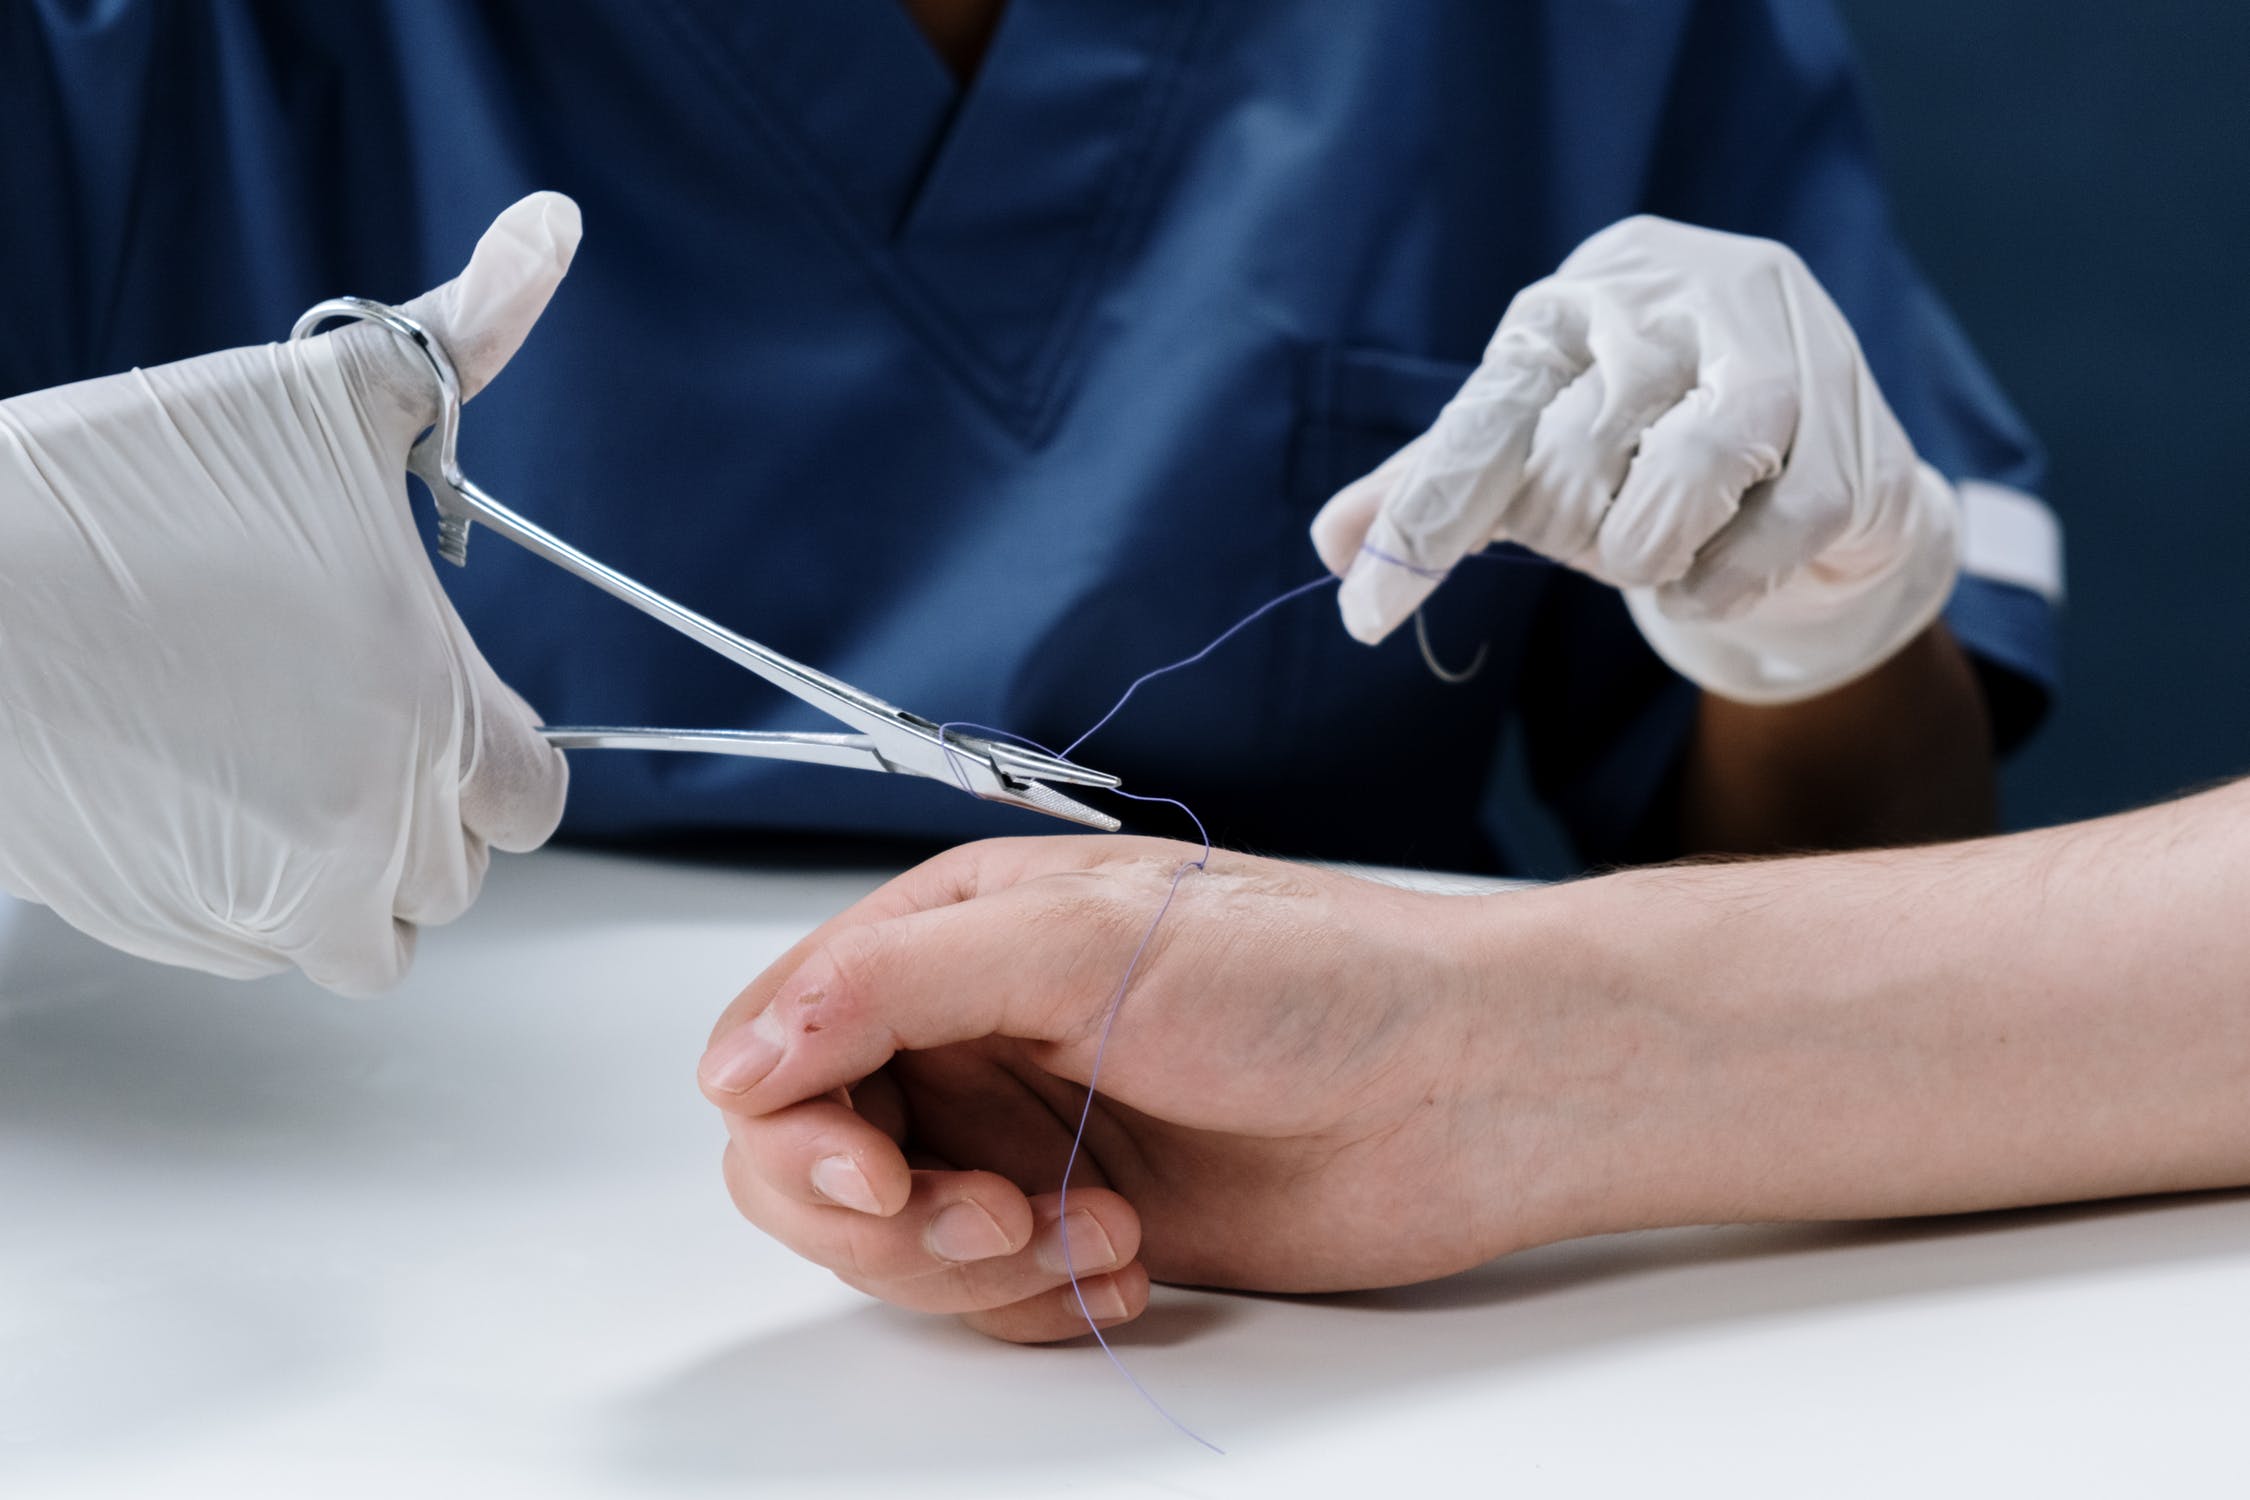 Knowing When a Cut Needs Stitches: Casa de Salud: Primary Care